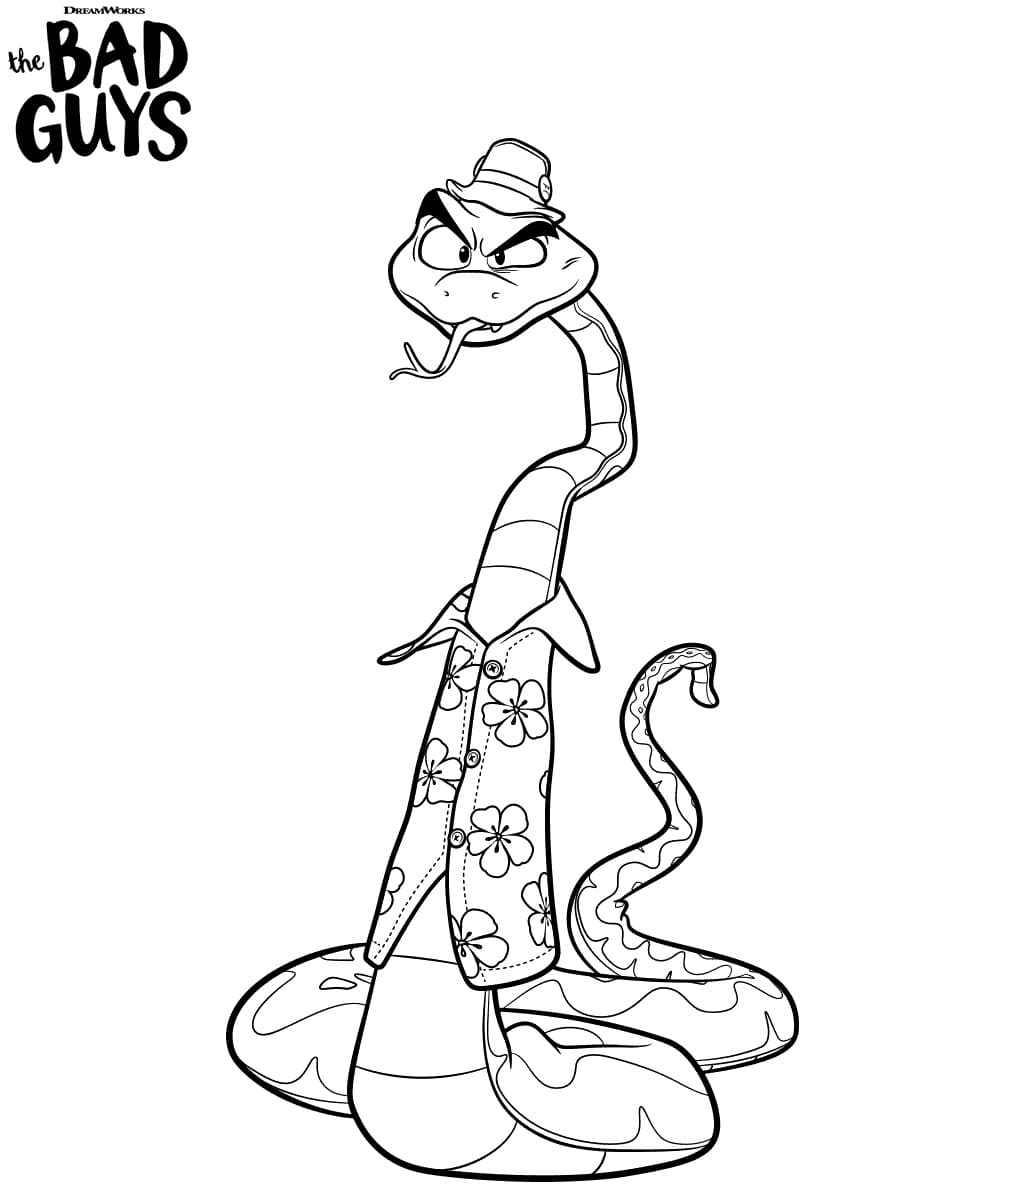 Mr. Snake from The Bad Guys Coloring Page - Free Printable Coloring Pages  for Kids